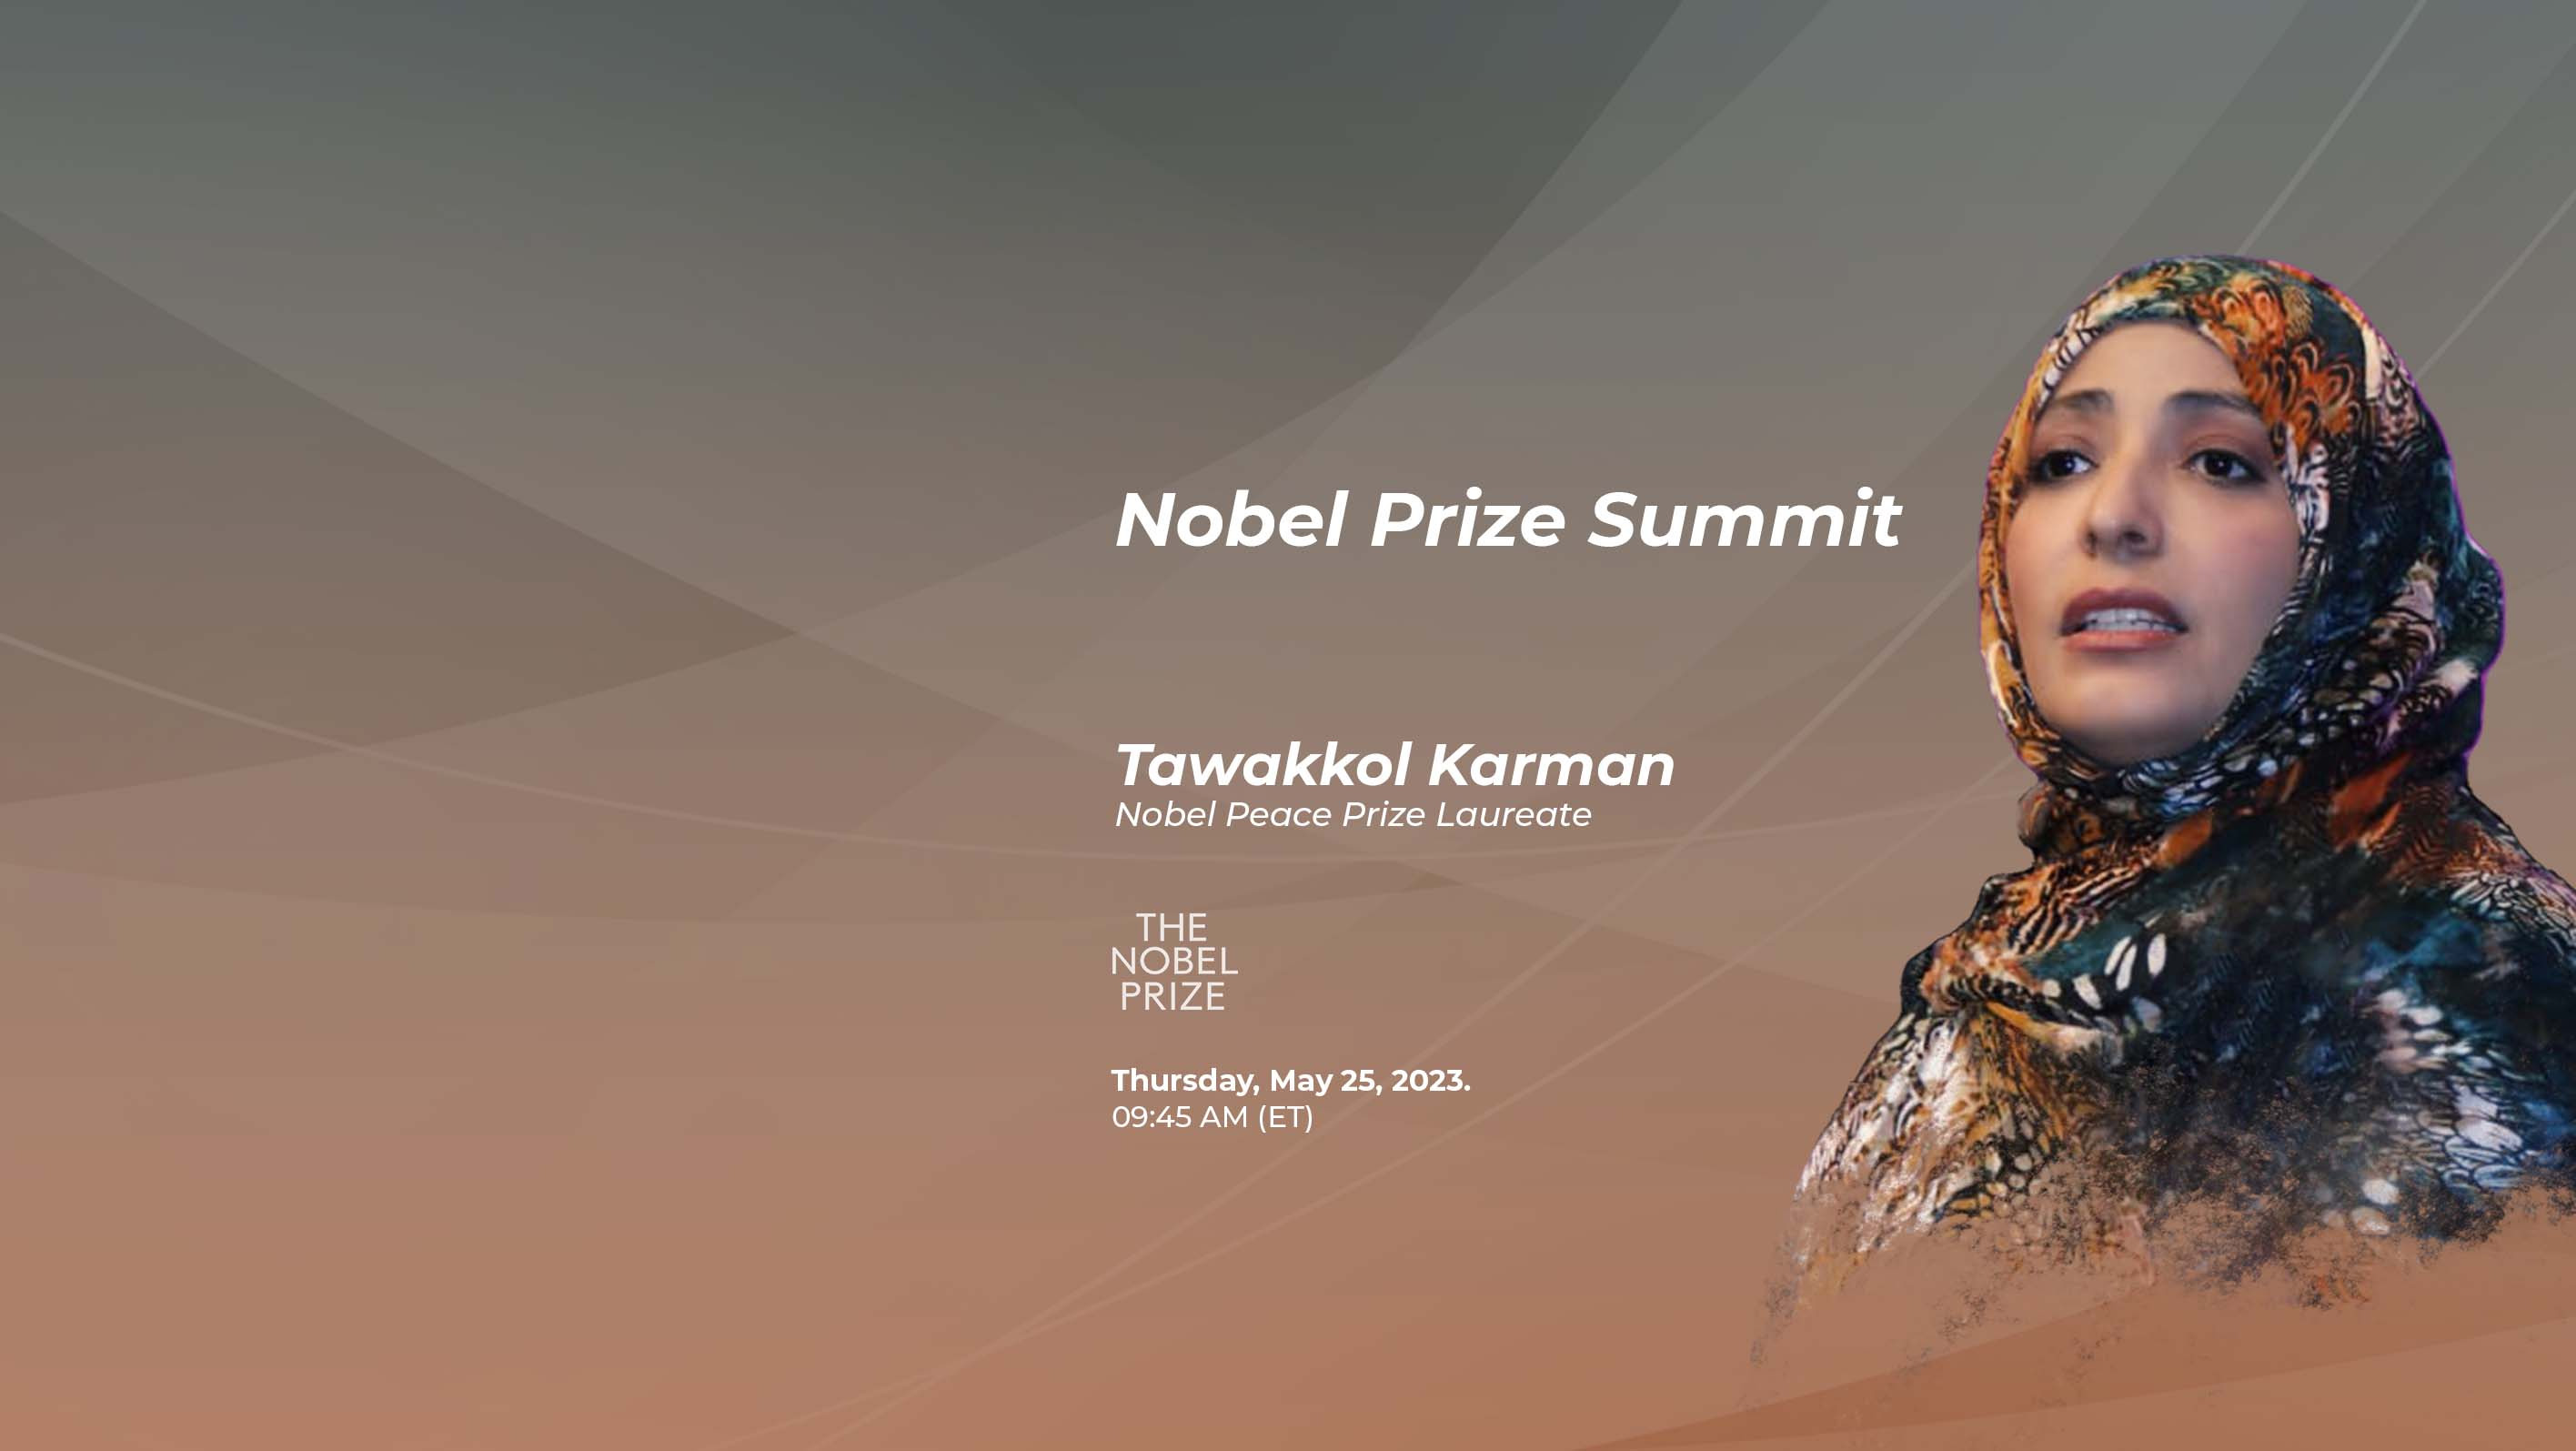 Mrs. Karman to contribute insights at Nobel Prize Summit